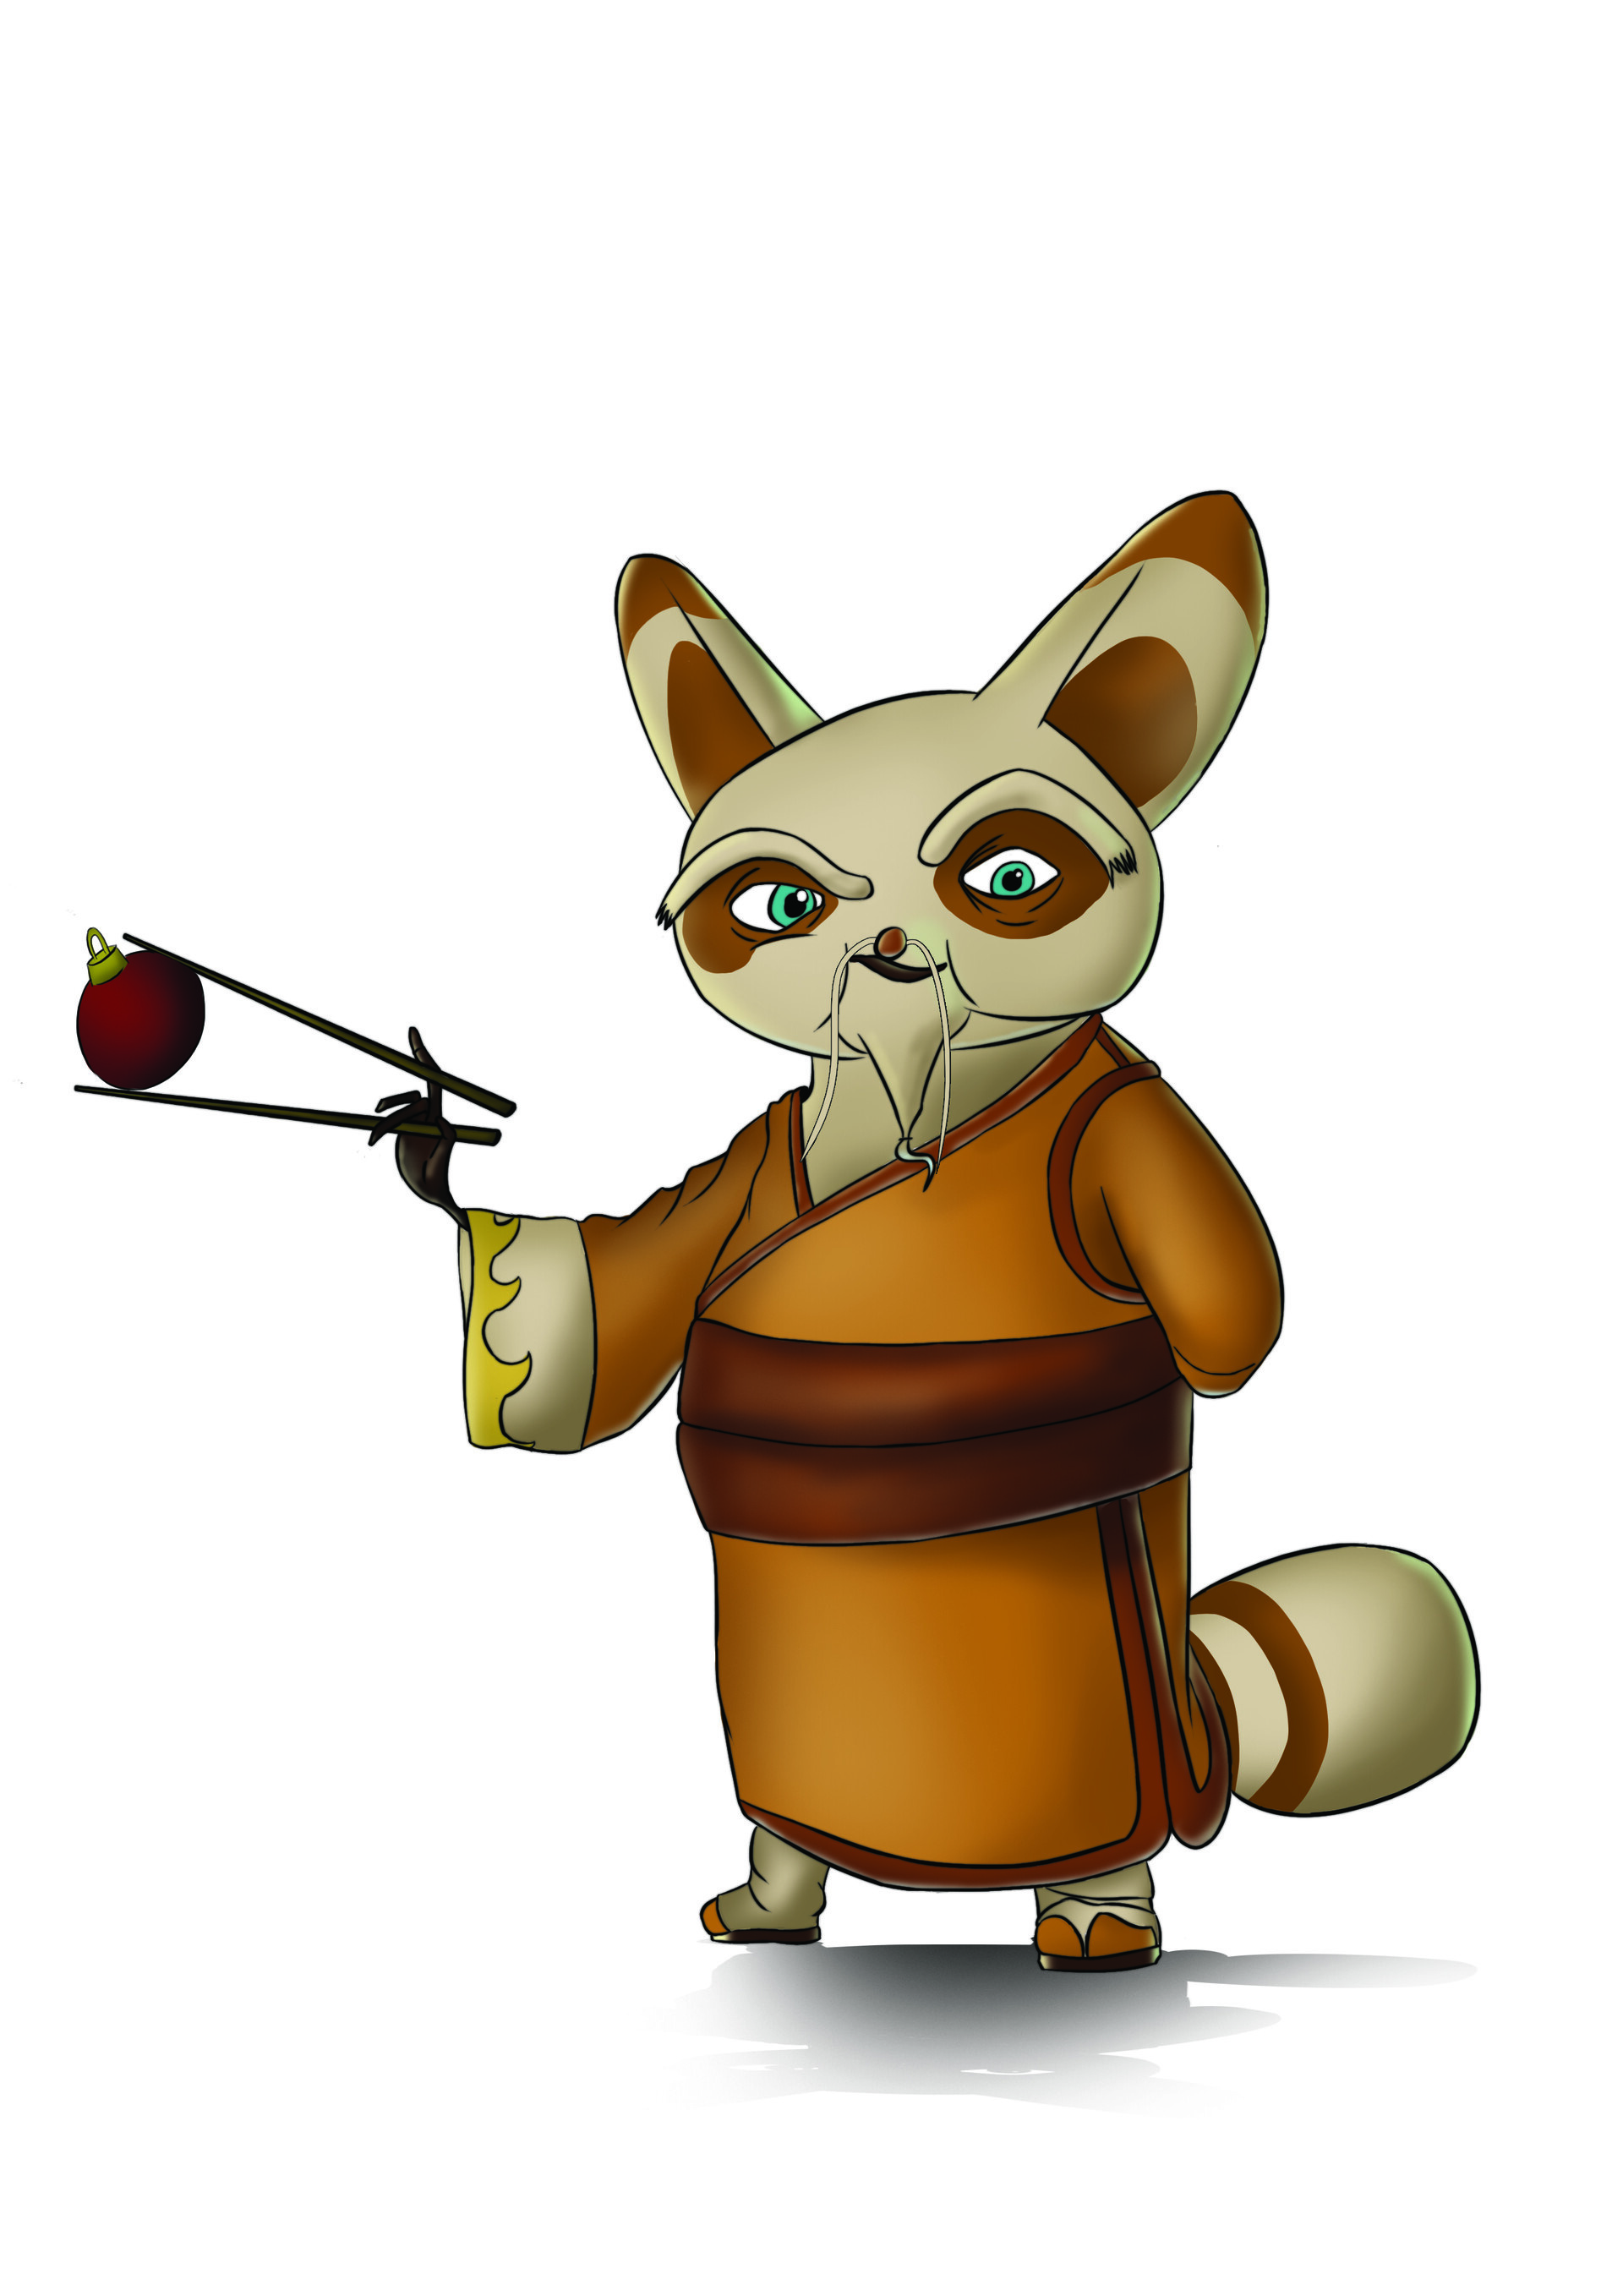 Master Shifu: Taught Po the skills needed for him to ultimately save the Valley of Peace. 1920x2720 HD Wallpaper.